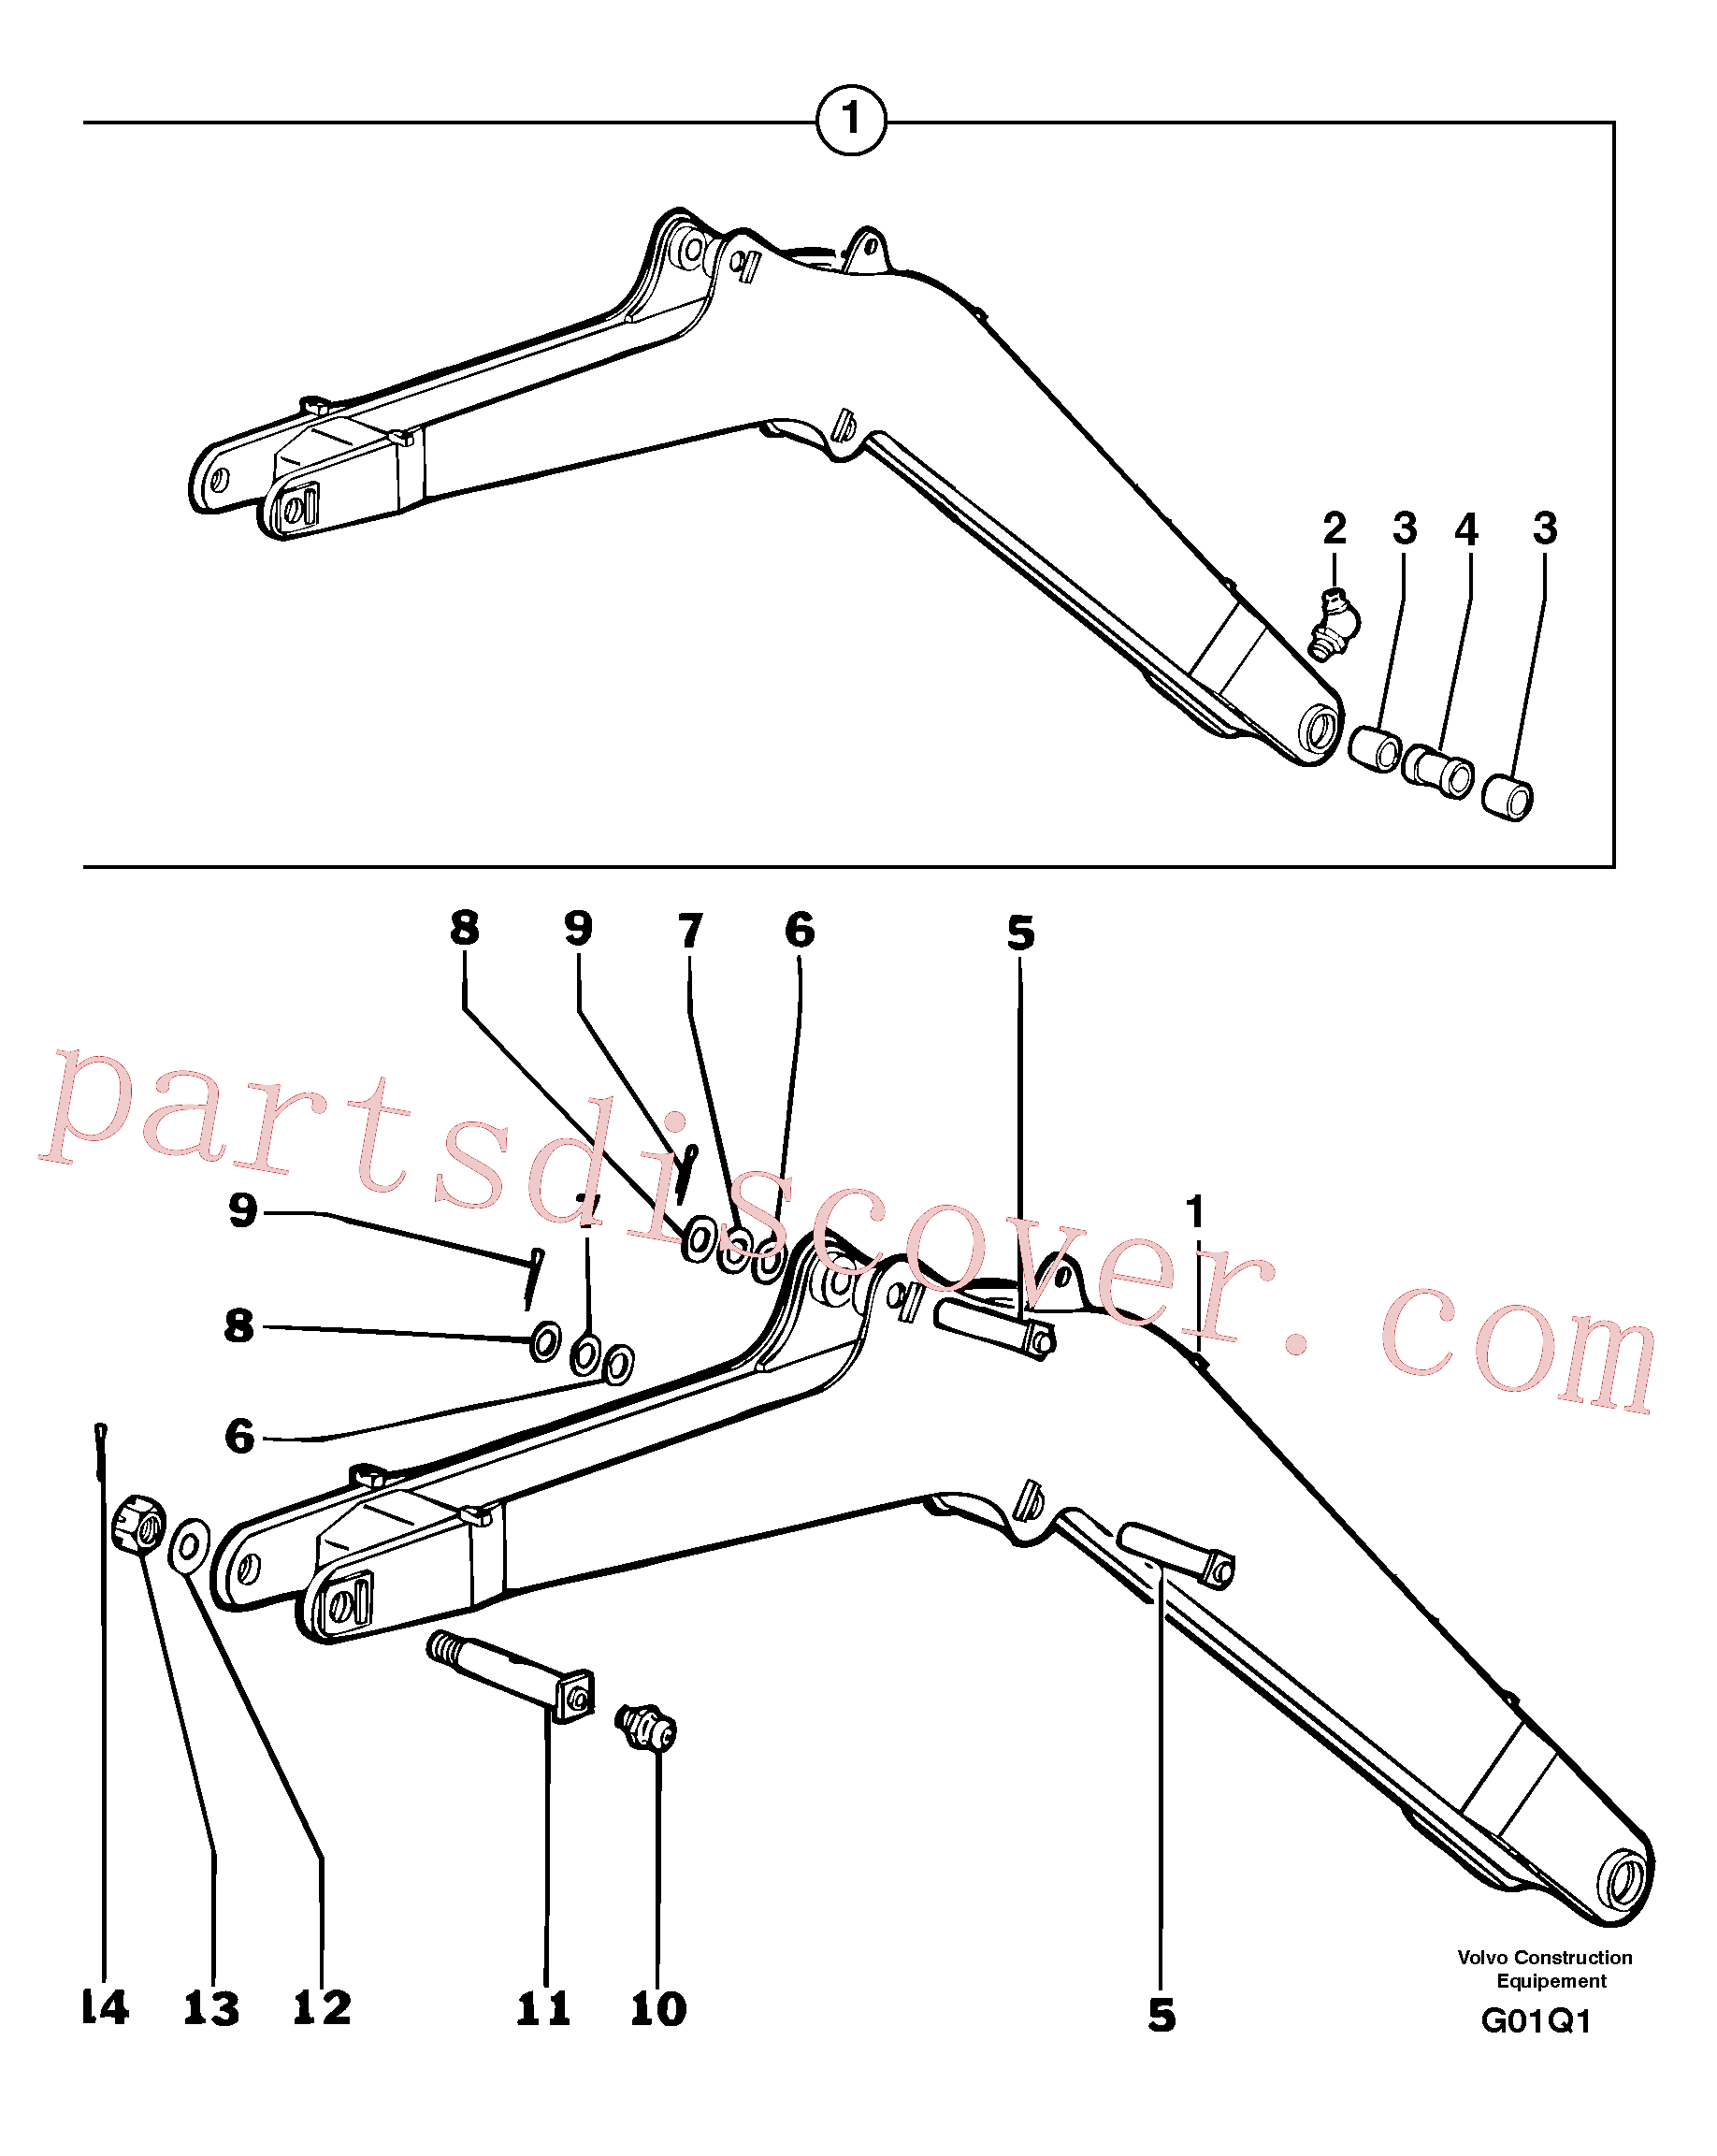 VOE907876 for Volvo Boom(G01Q1 assembly)